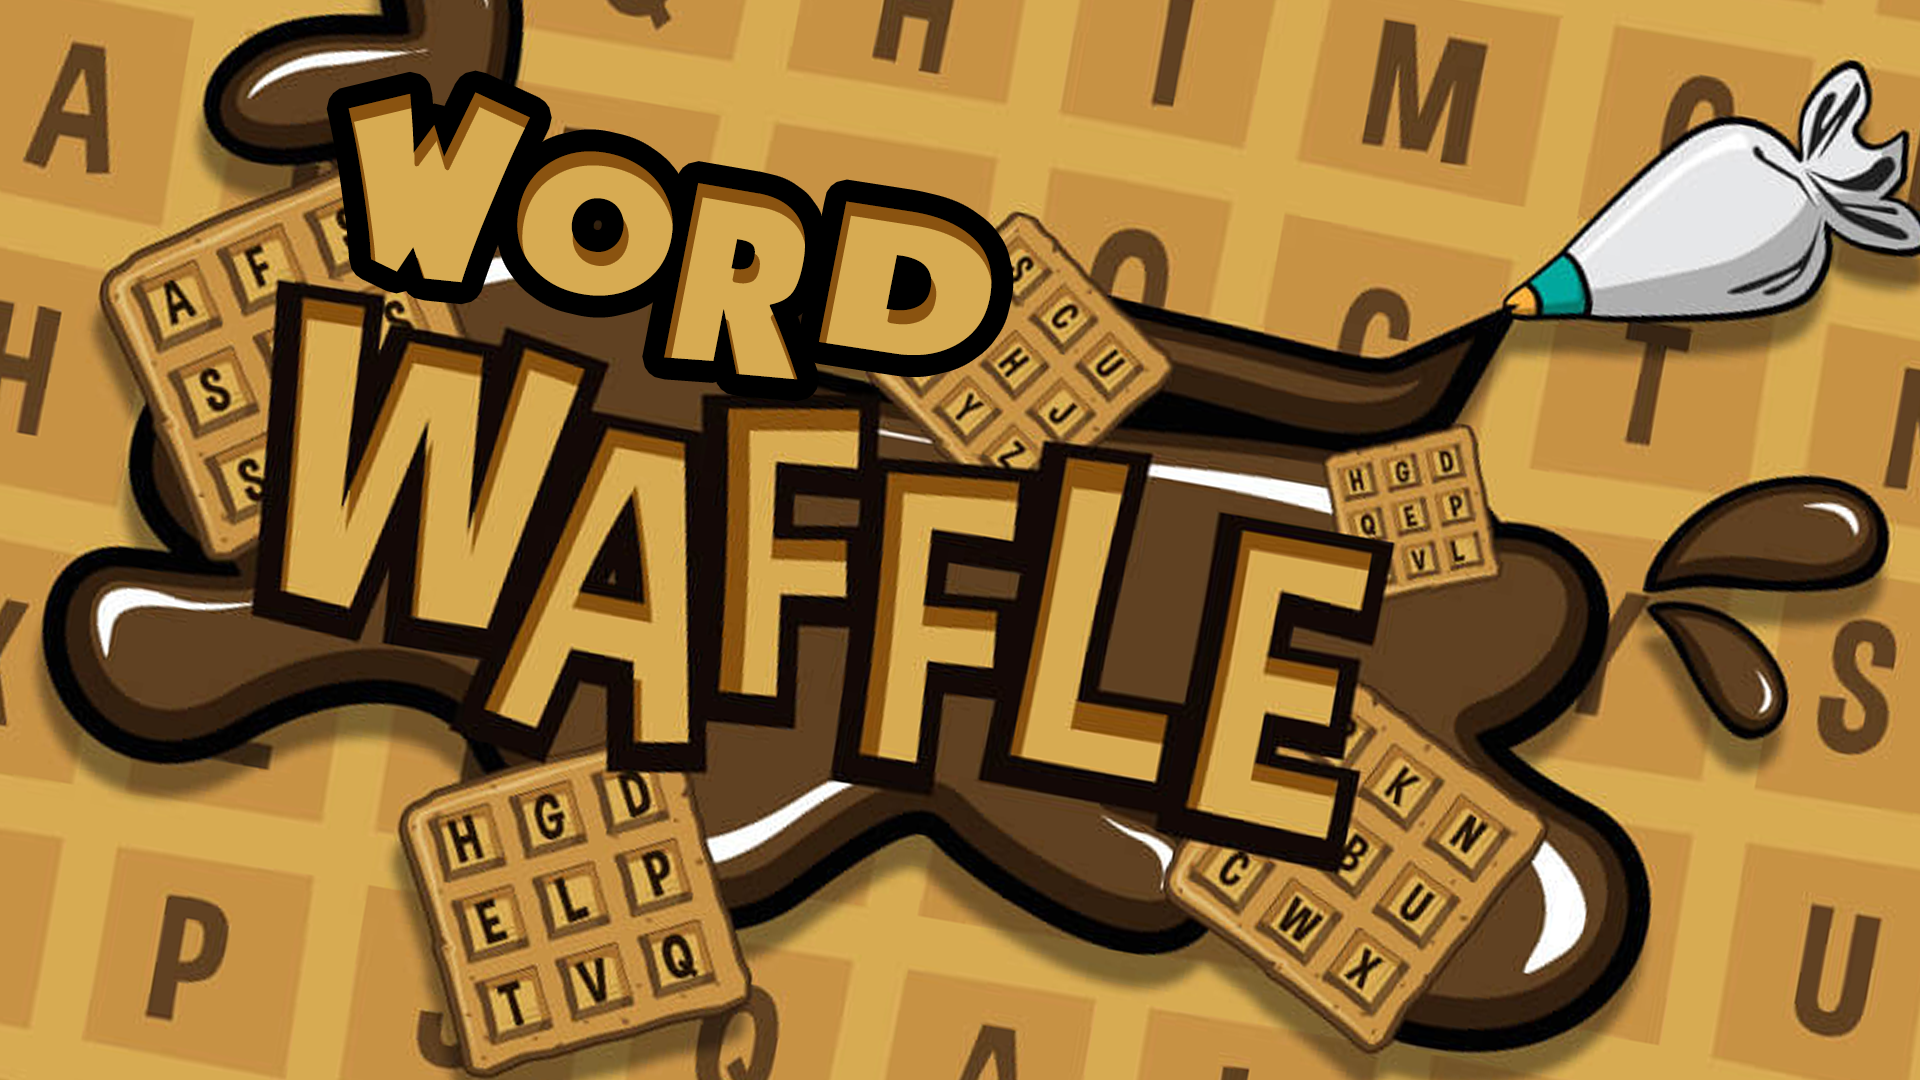 Waffle - like Wordle but also like a waffle - Let me know what you